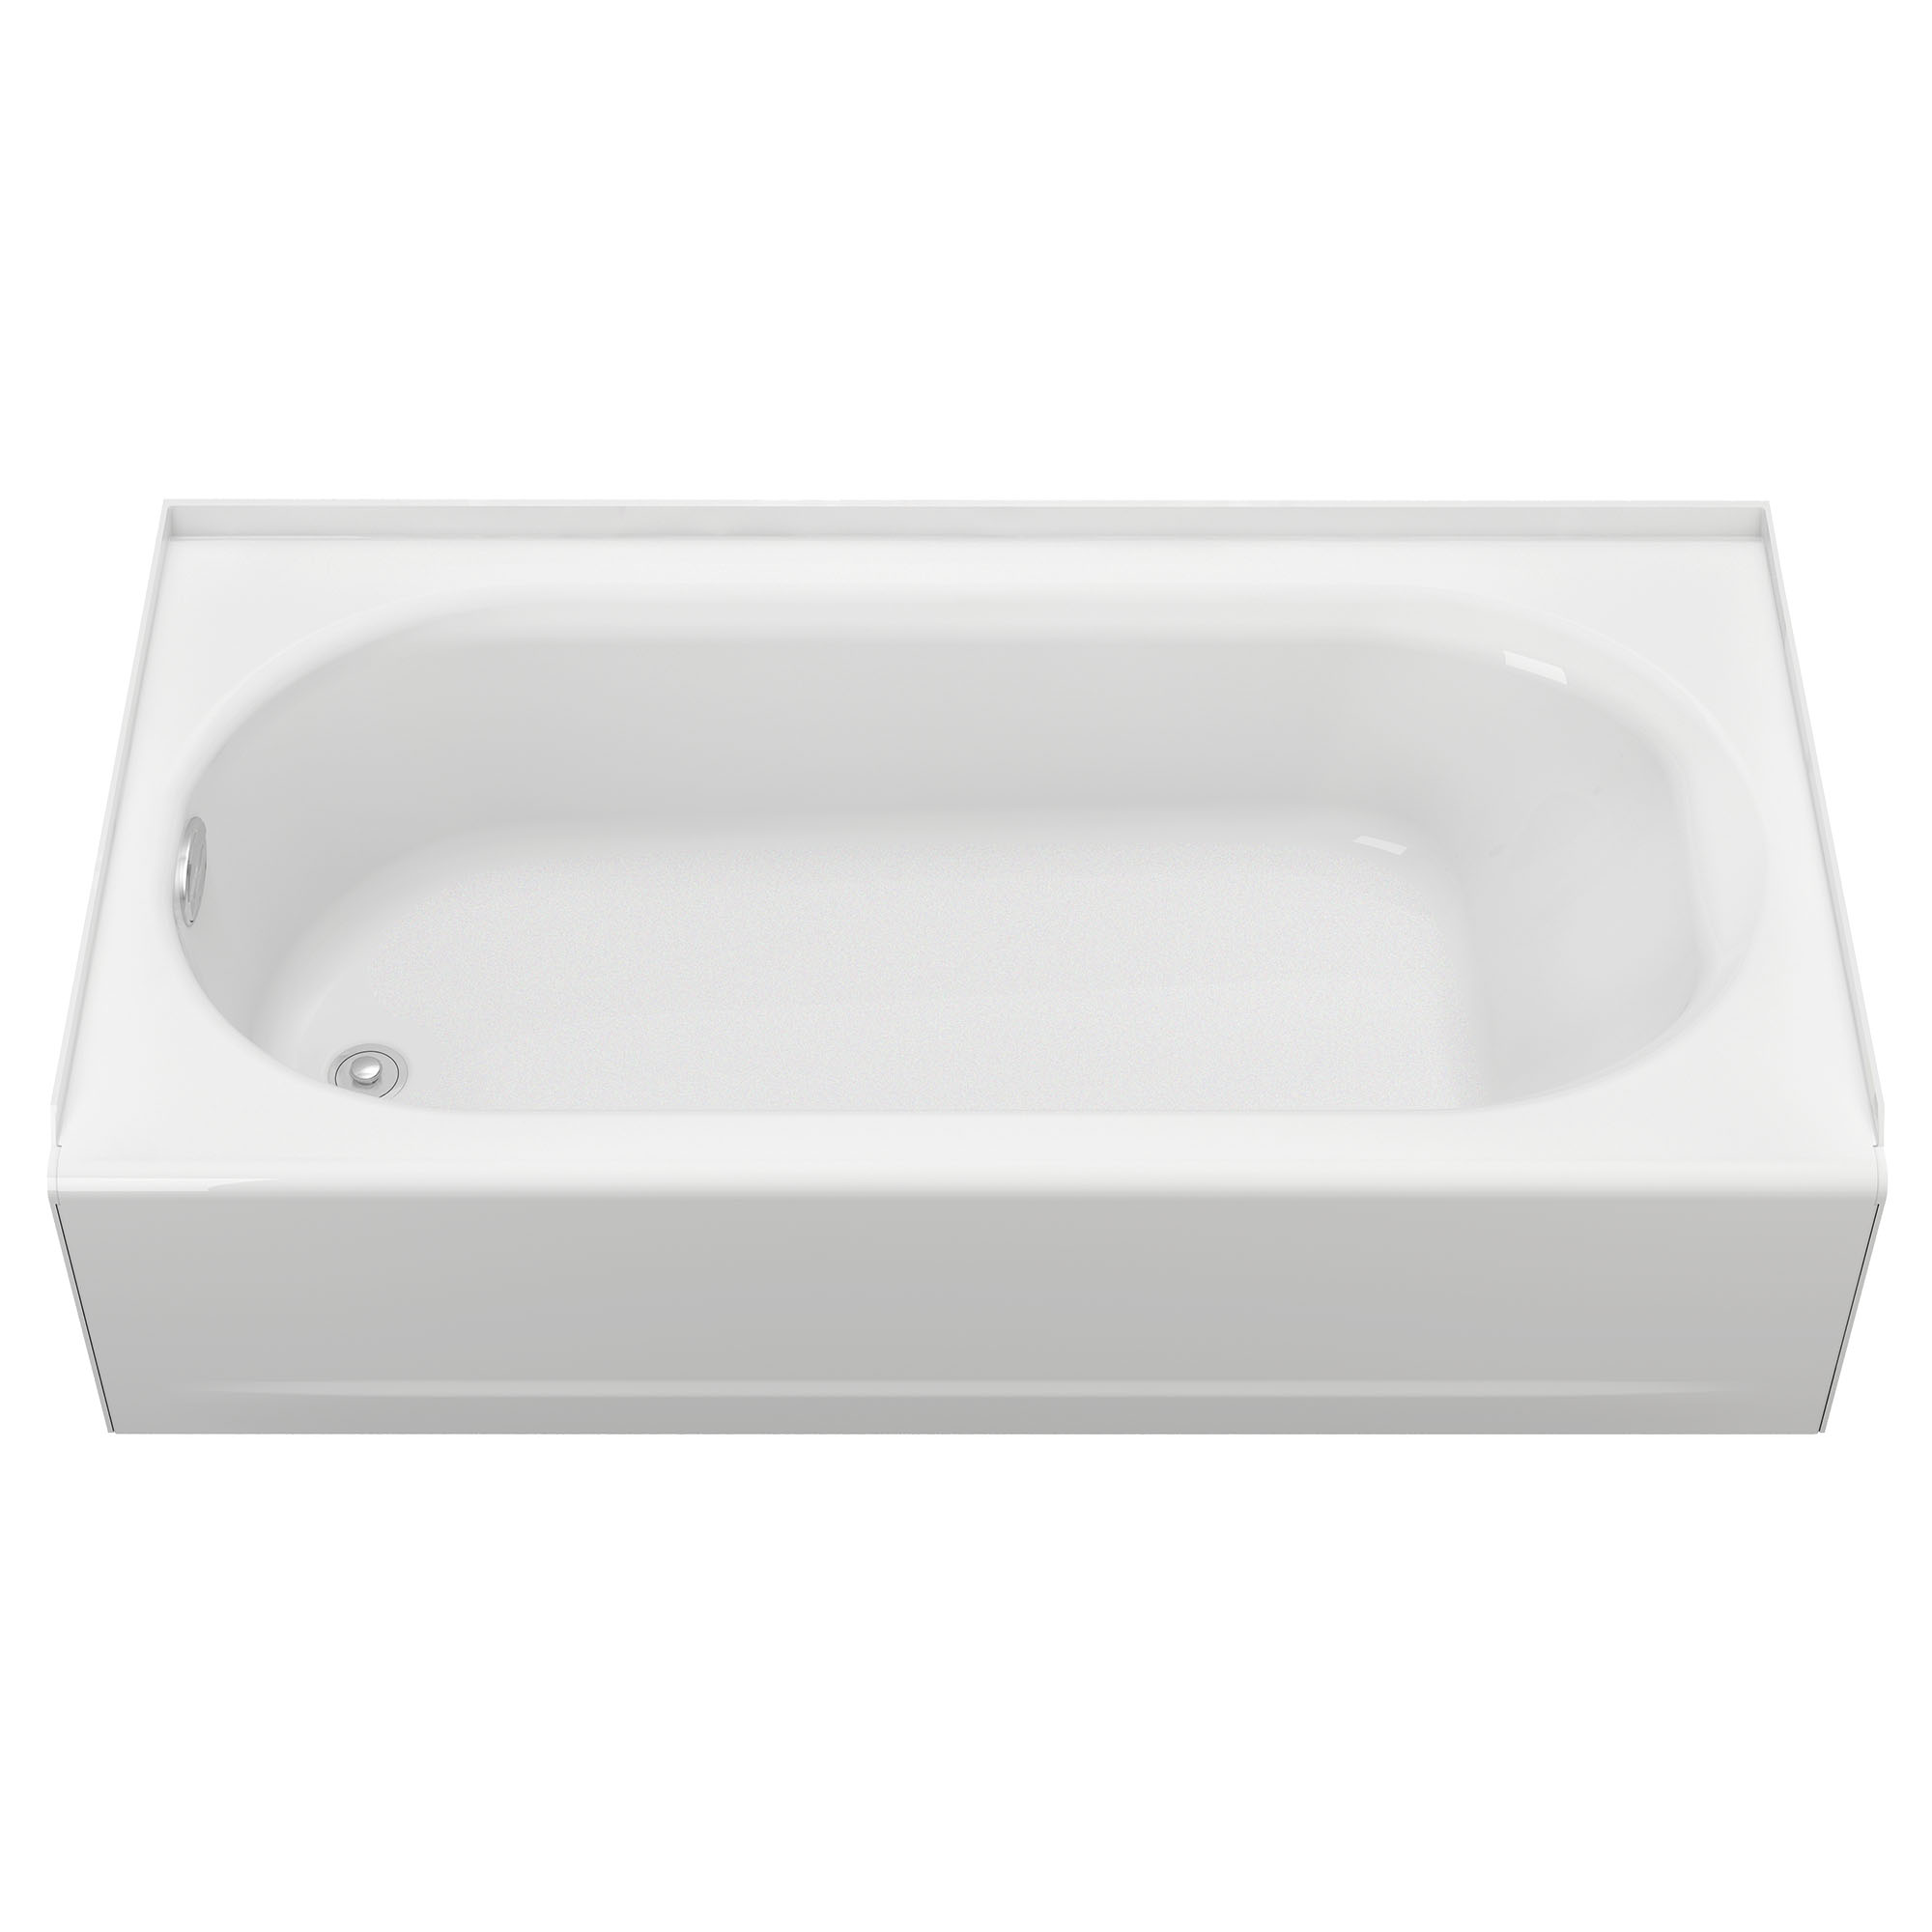 Princeton® Americast® 60 x 34-Inch Integral Apron Bathtub Left-Hand Outlet Luxury Ledge with Integral Drain